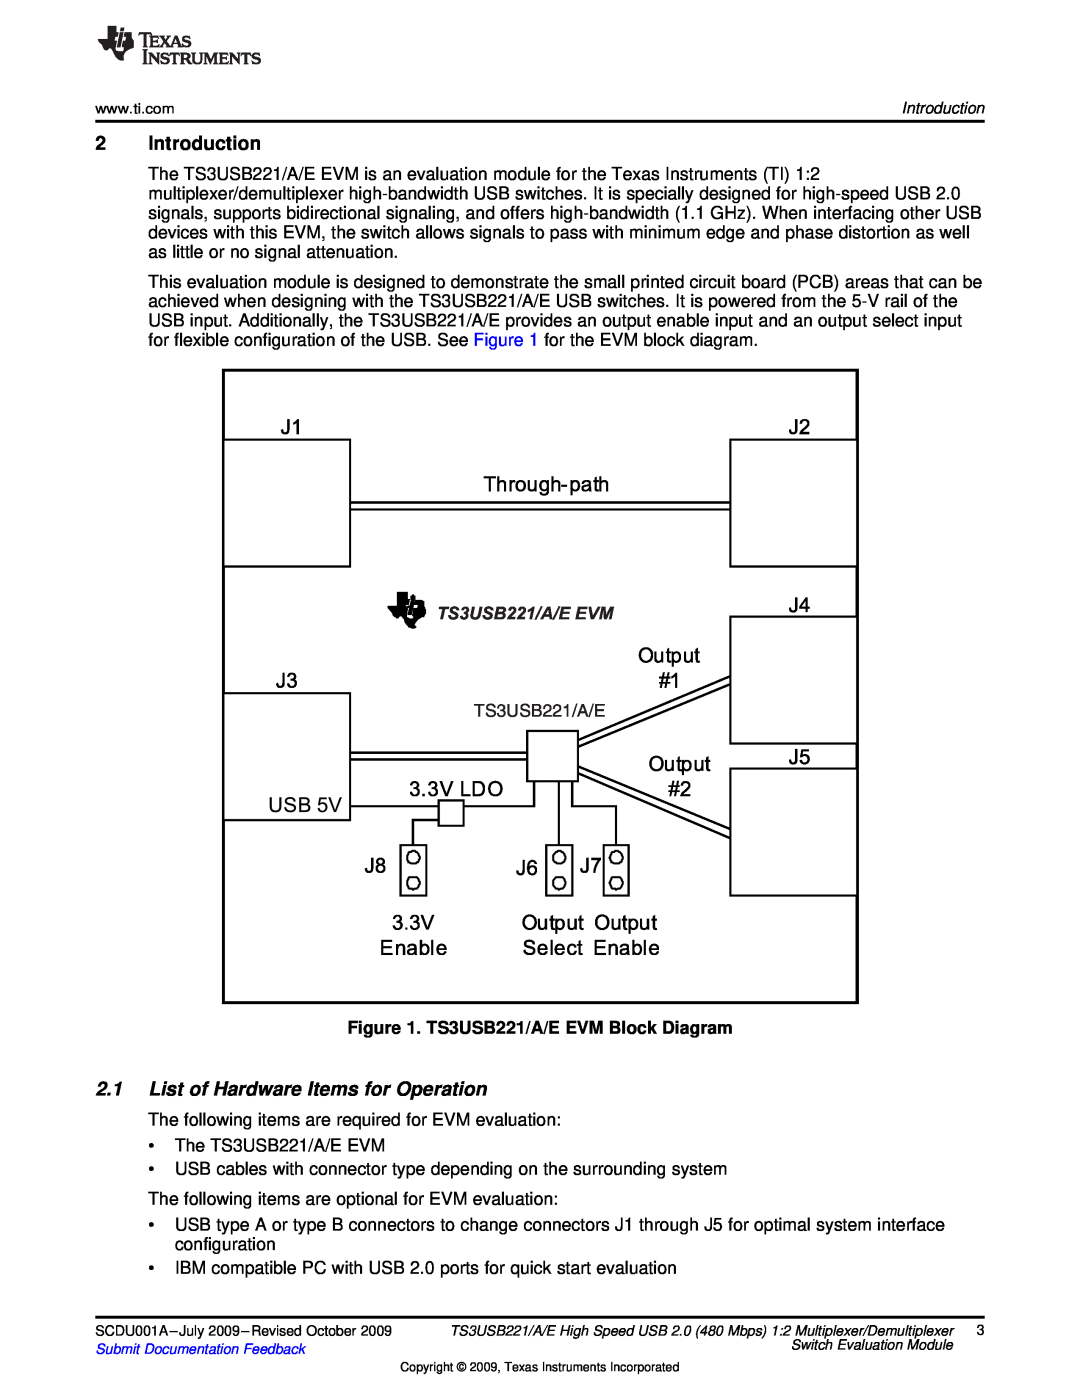 Texas Instruments quick start Introduction, List of Hardware Items for Operation, TS3USB221/A/E EVM Block Diagram 